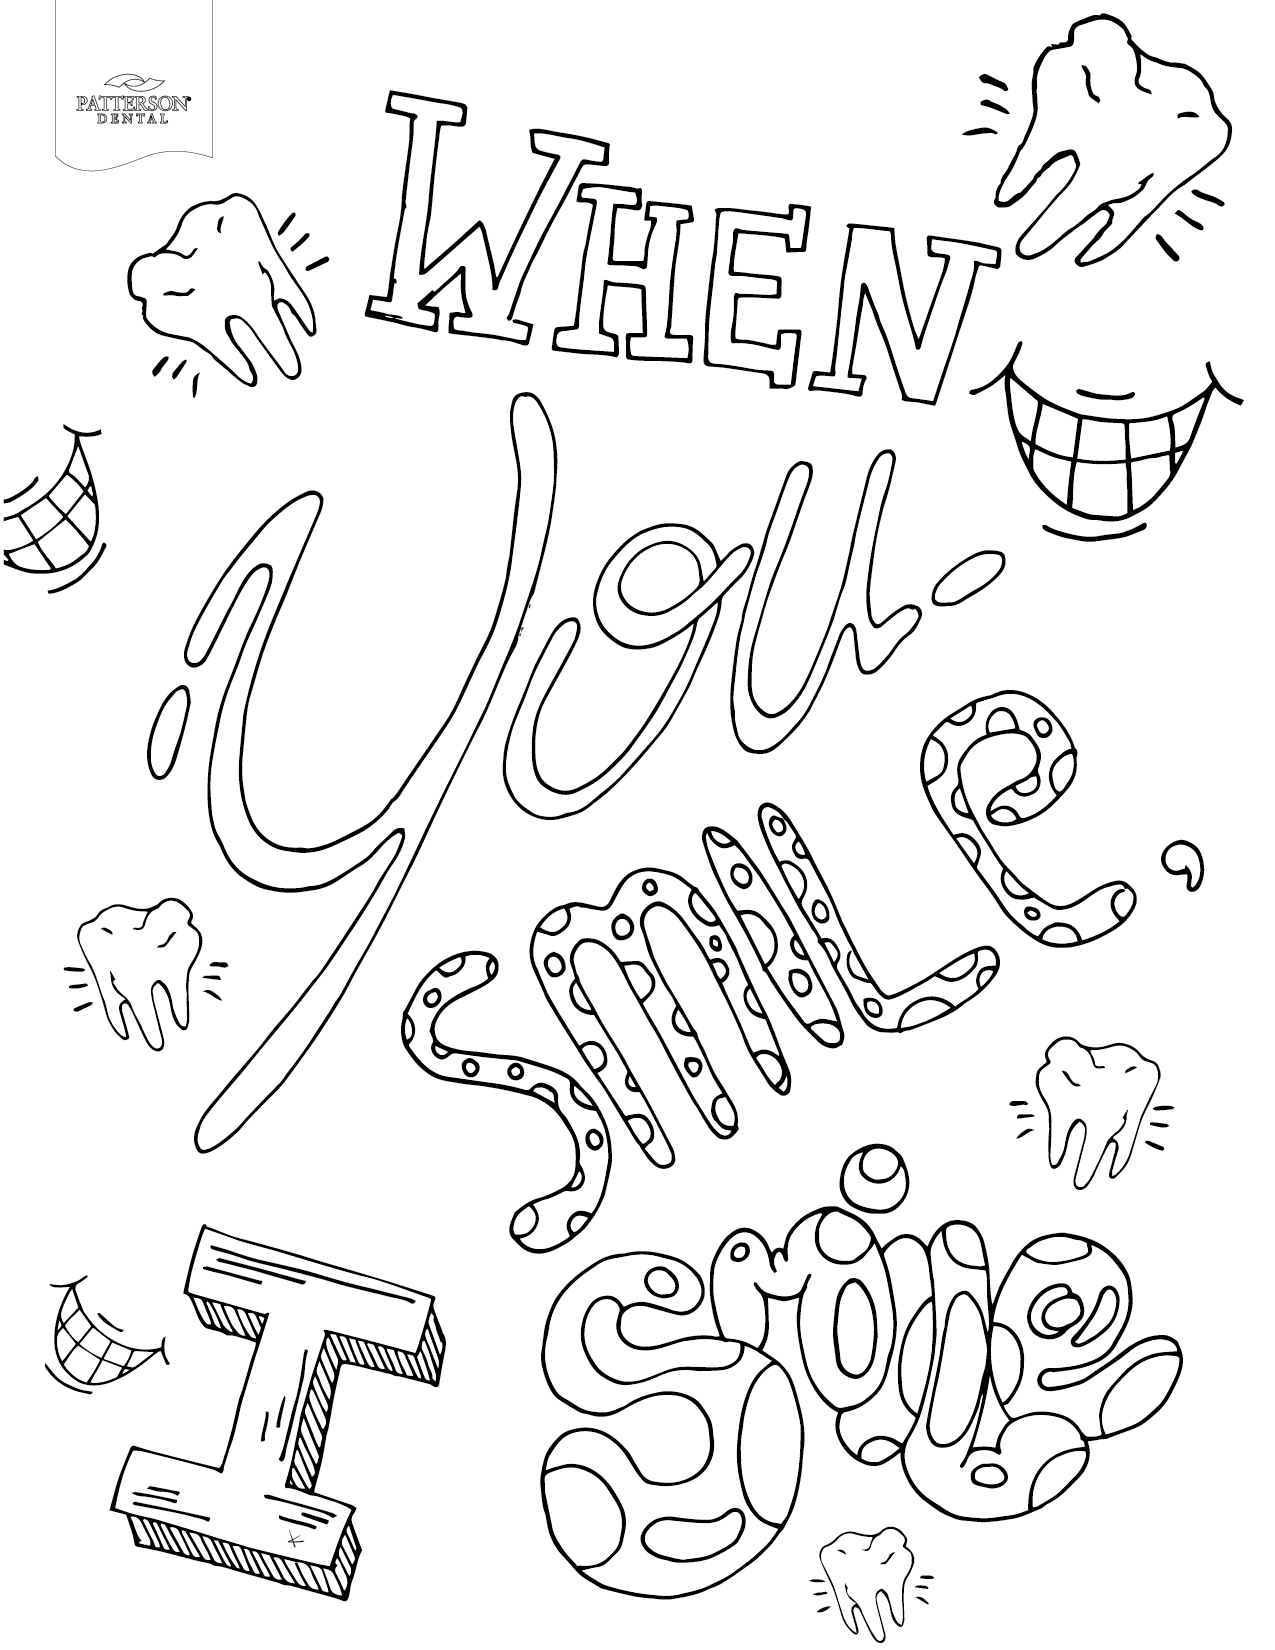 10 Toothy Adult Coloring Pages [Printable] - Off The Cusp